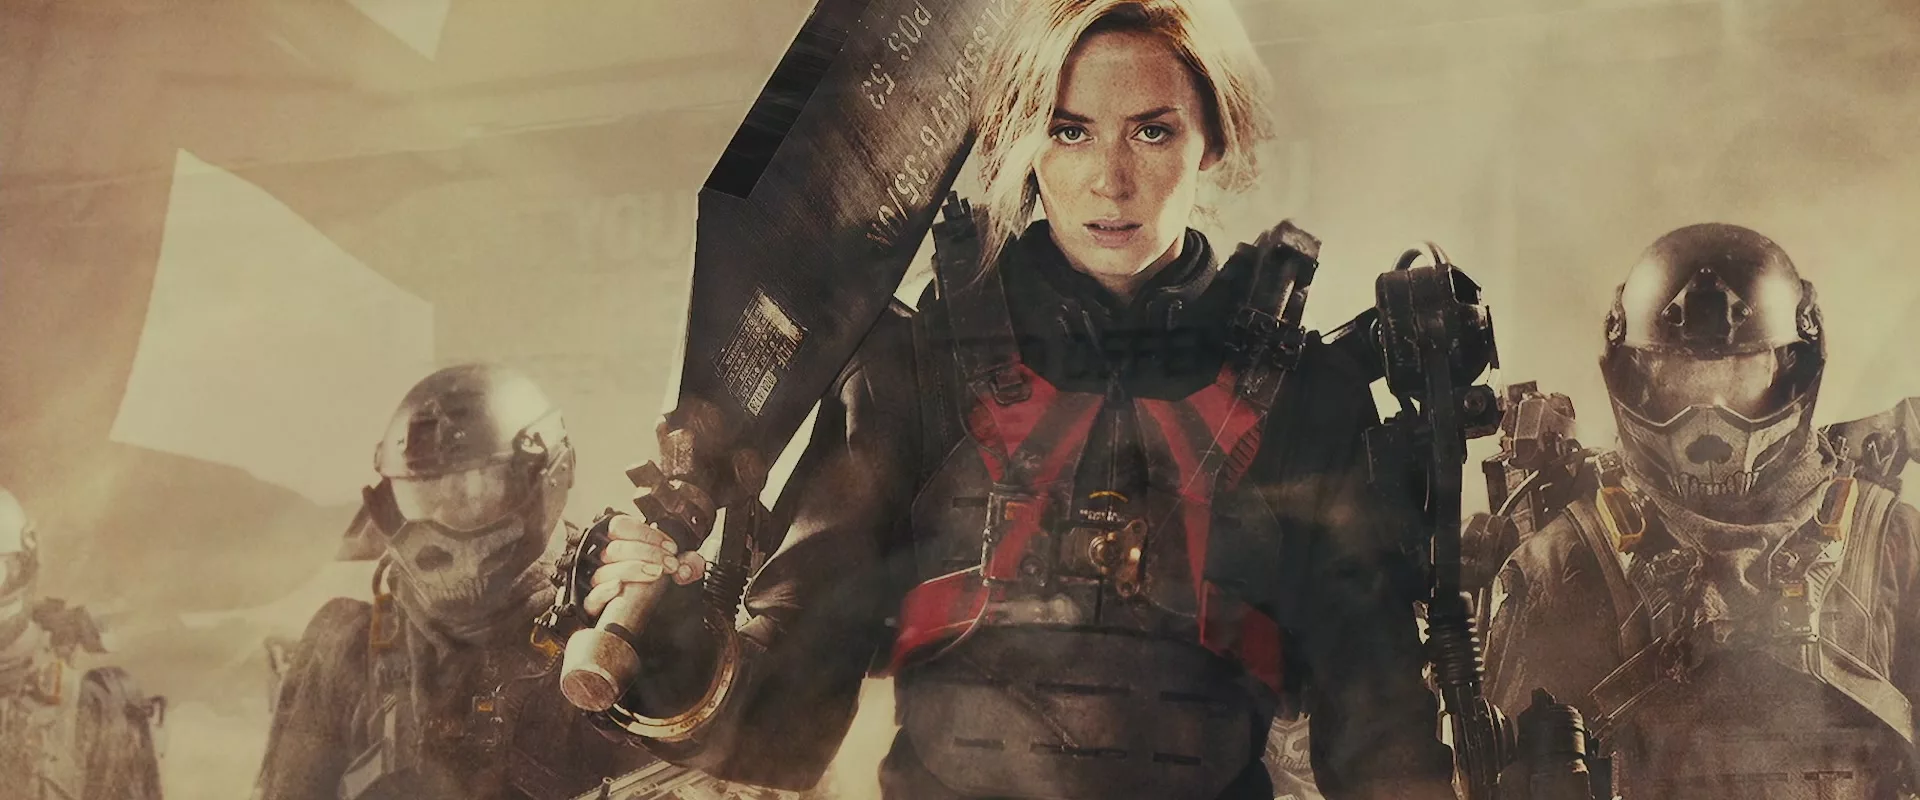 Edge of Tomorrow: 10 years ago the world learned how cool Emily Blunt's push-ups are - My, I advise you to look, Movie review, Боевики, Screen adaptation, Edge of the future, Fantasy, GIF, Longpost